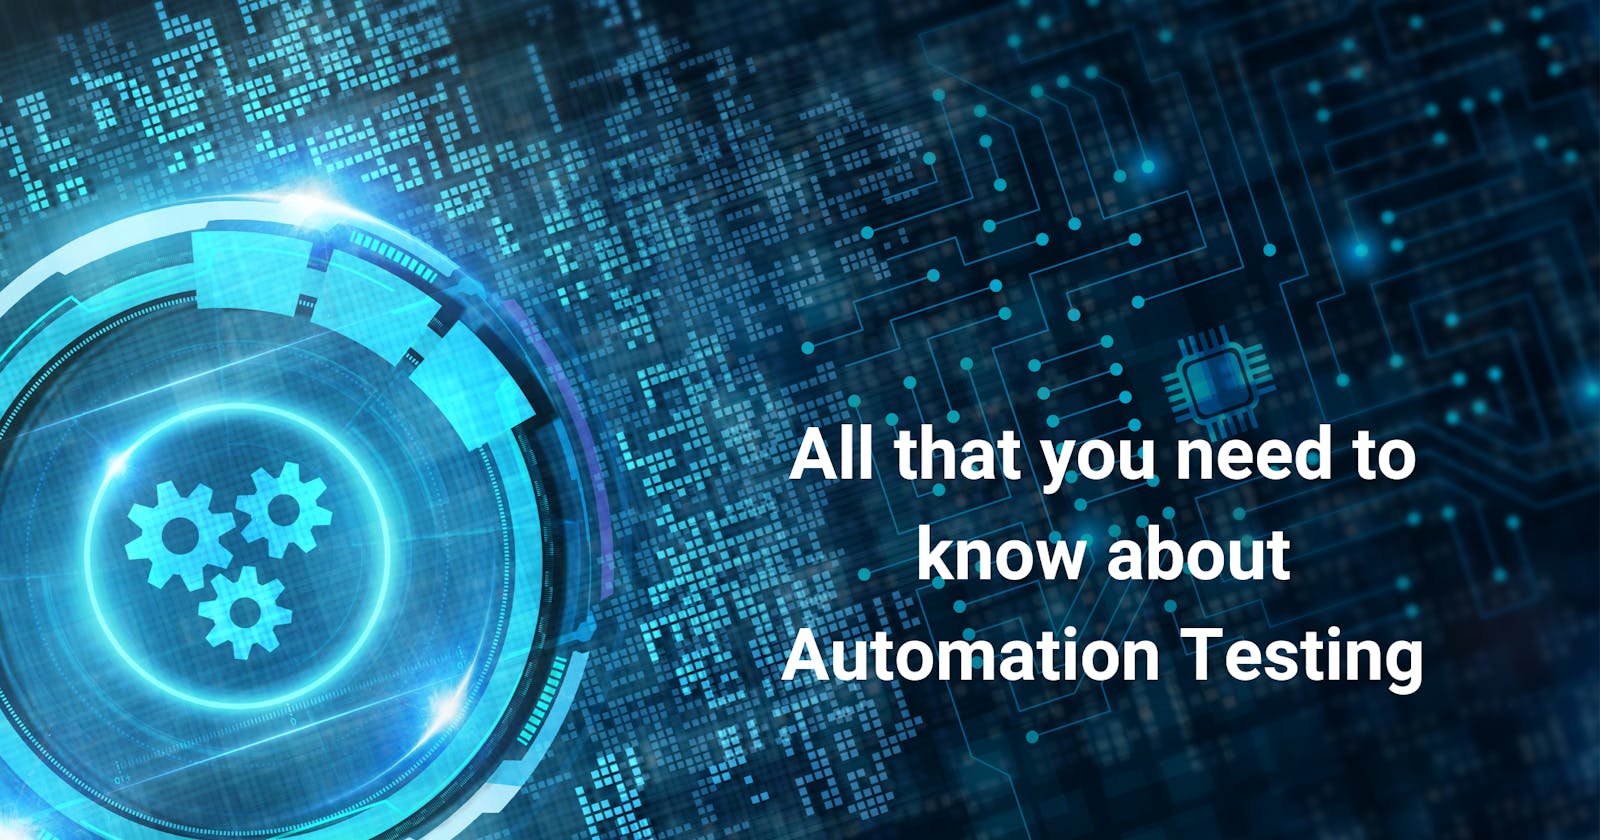 All that you need to know about Automation Testing